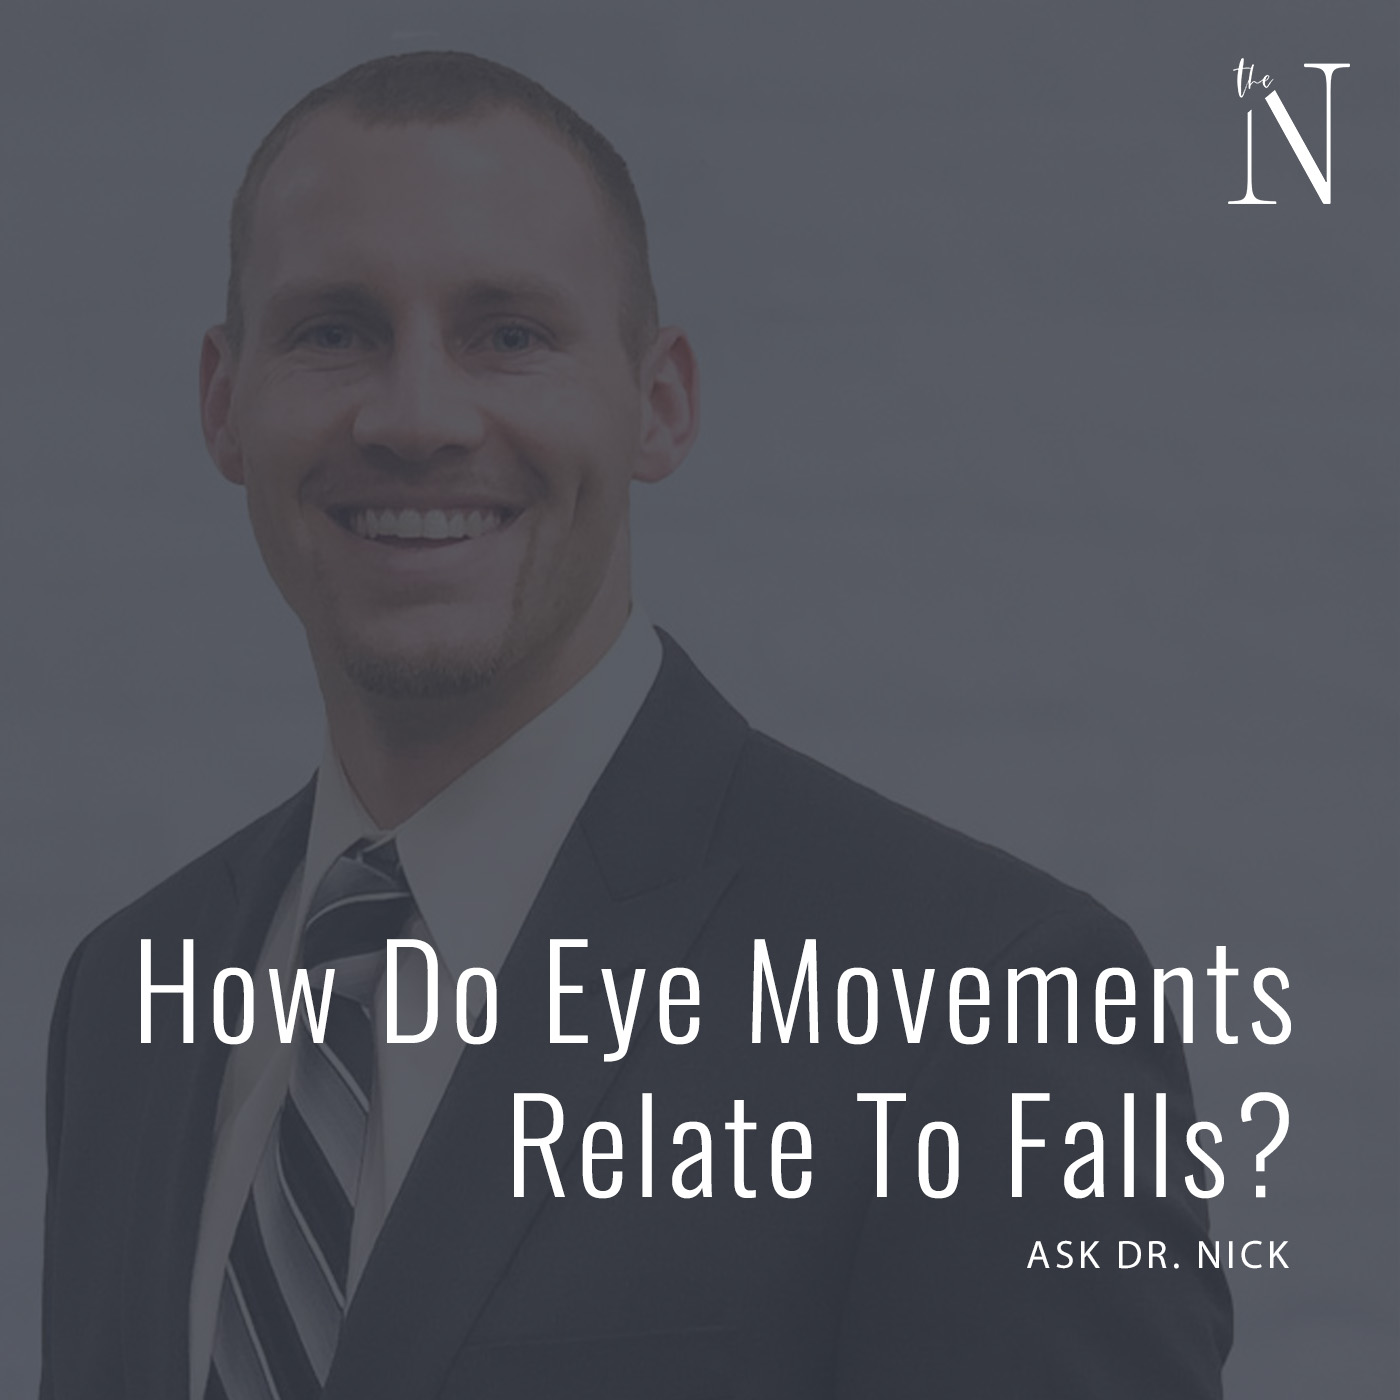 How Do Eye Movements Relate To Falls